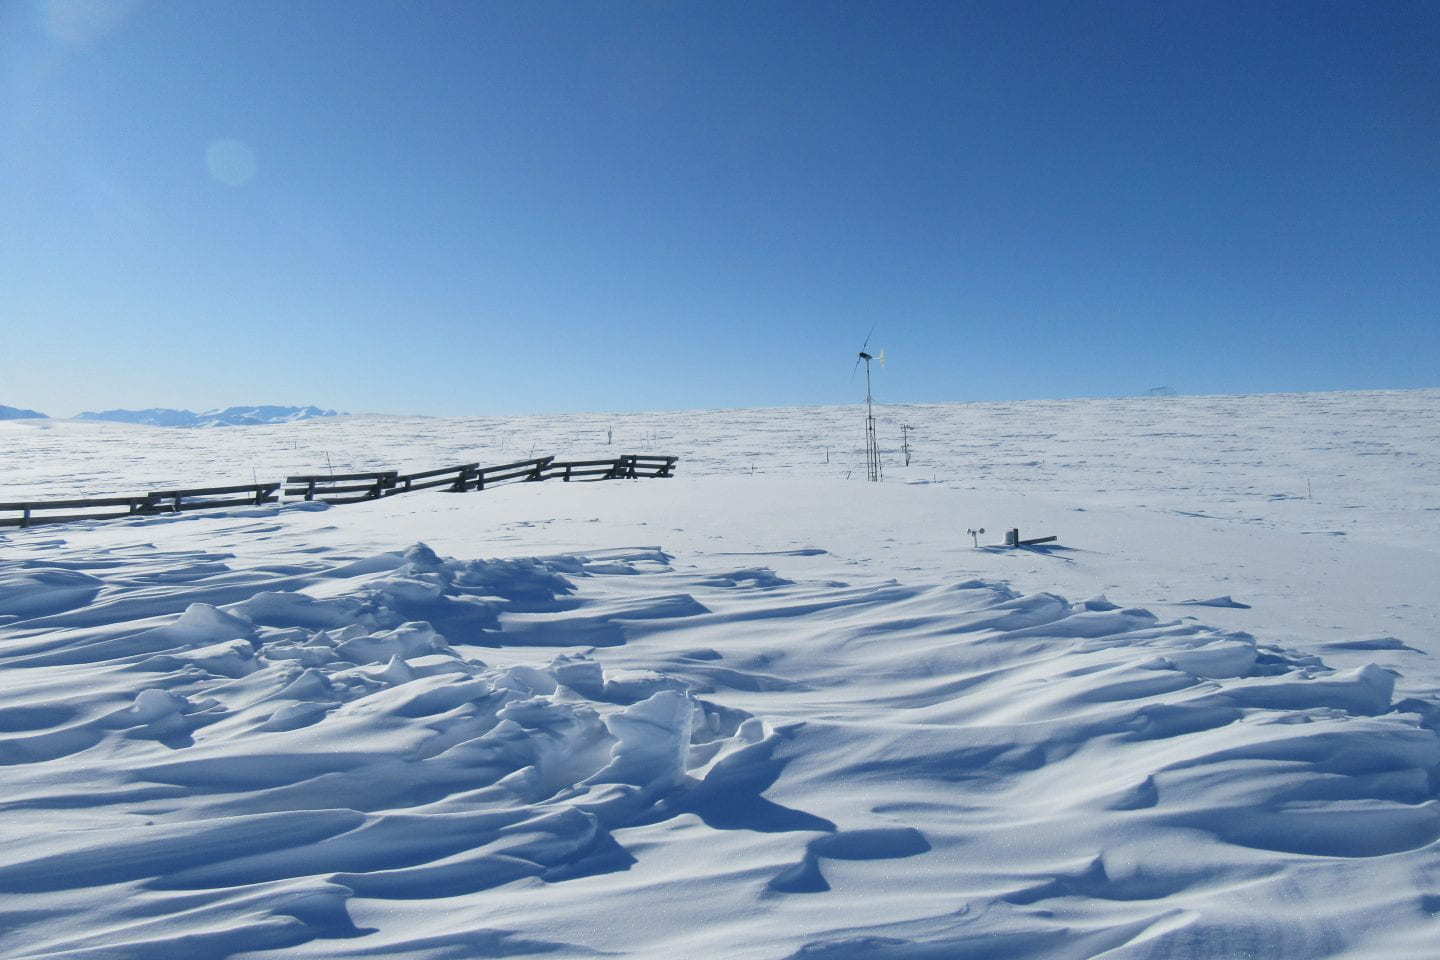 Greater Snowfall Speeds the Melting of Arctic Tundra, Study Finds